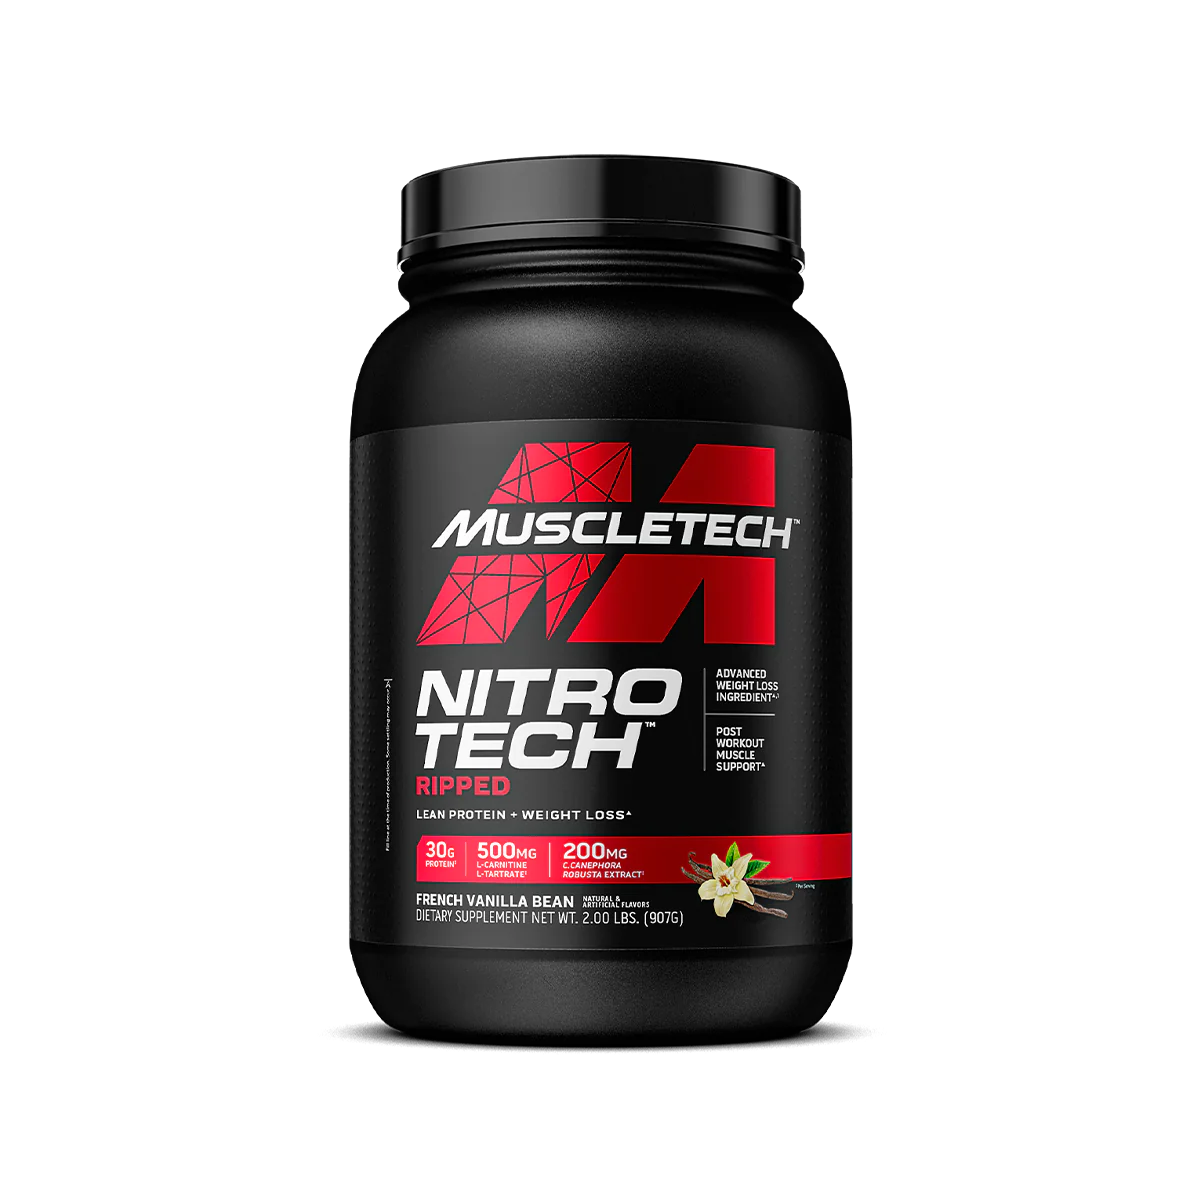 MuscleTech, Nitro Tech Ripped, Lean Protein + Weight Loss, 2 lbs (907 g)